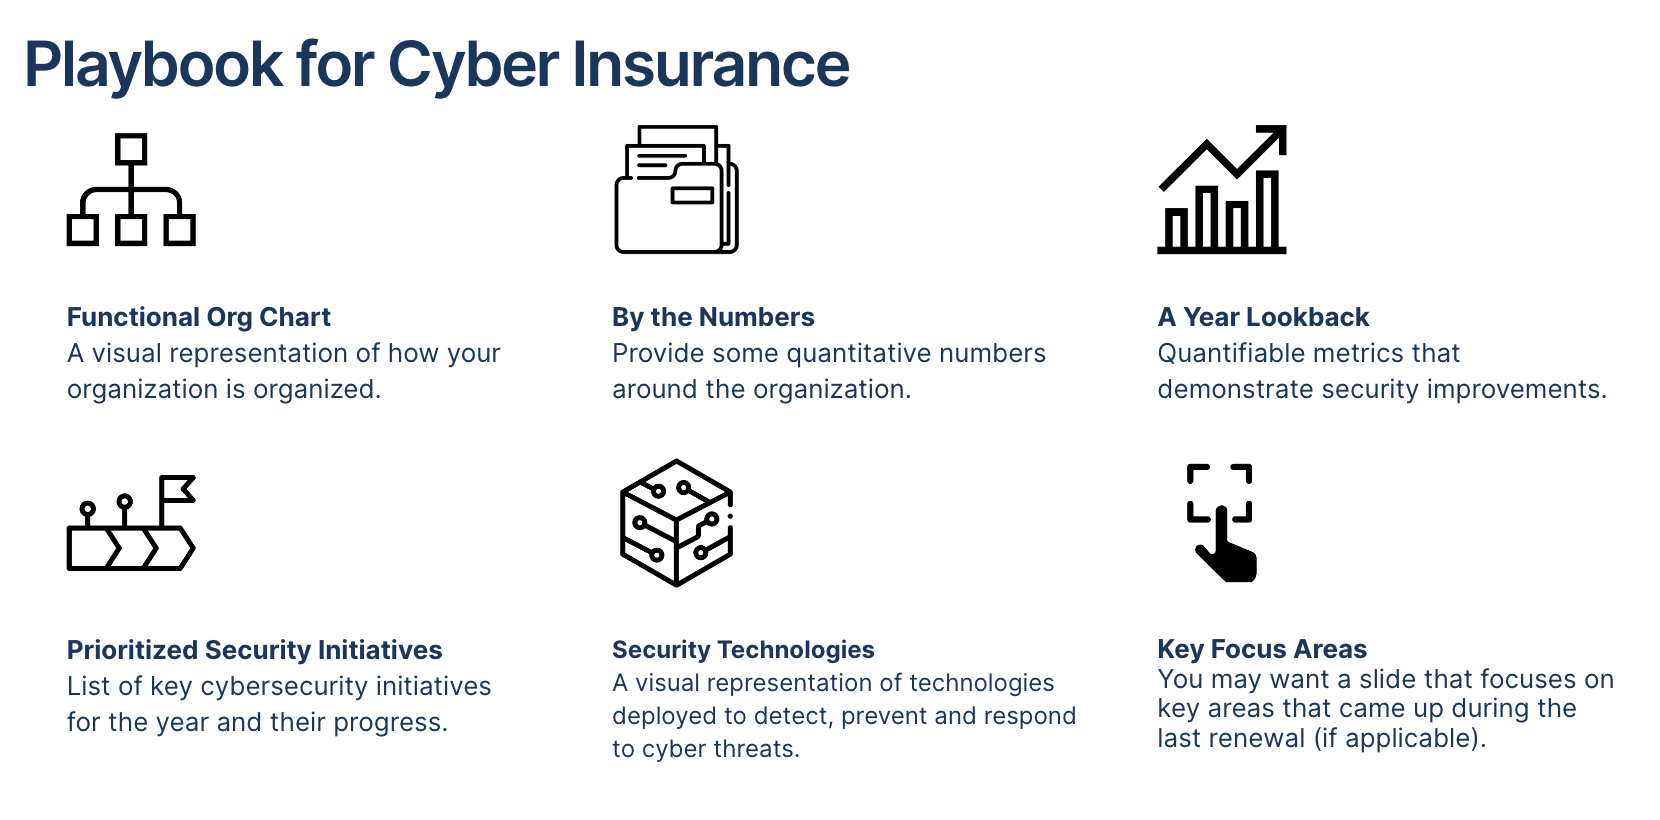 Negotiate Your Next Cyber Insurance Policy With This 6-Step Playbook